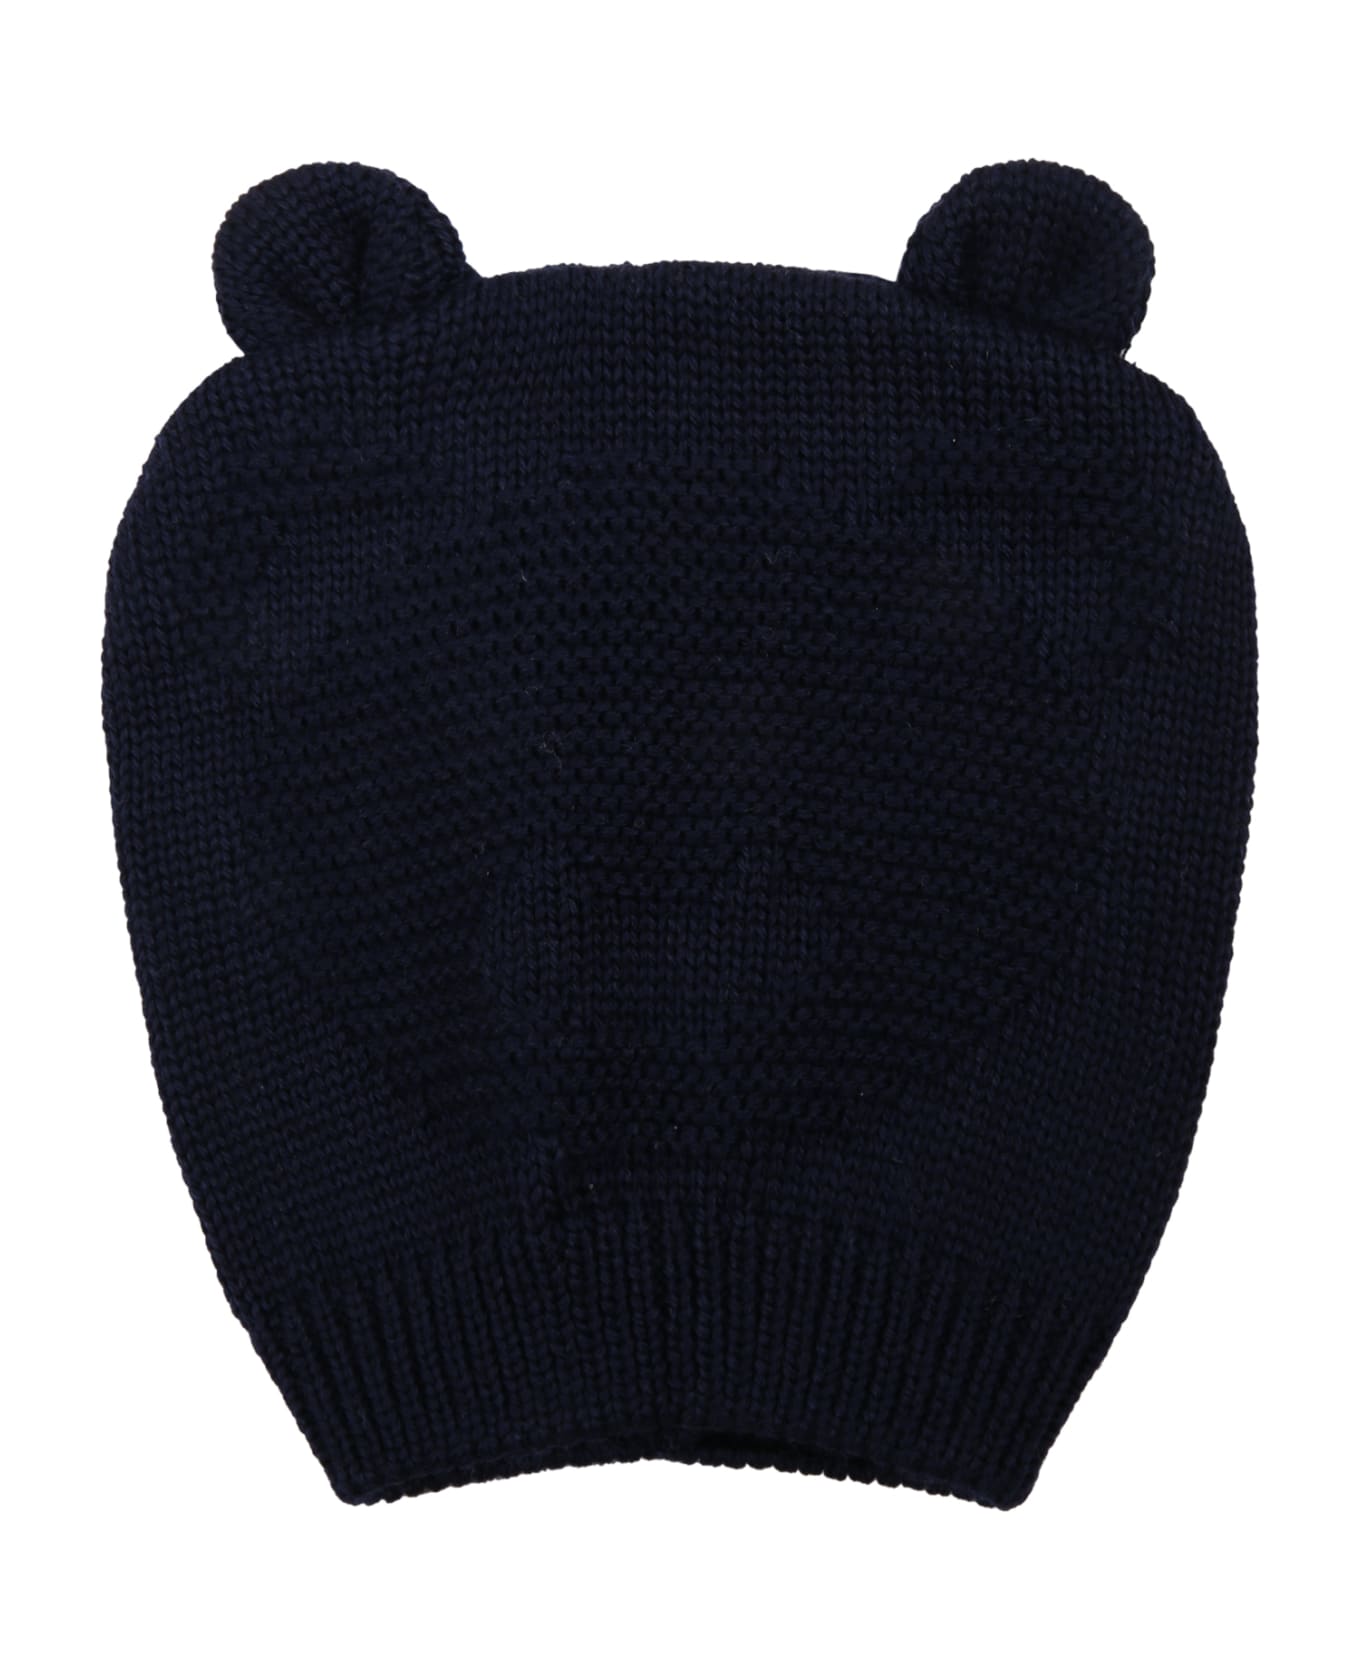 Little Bear Blue hats Hat For Baby Boy With Bear - Blue